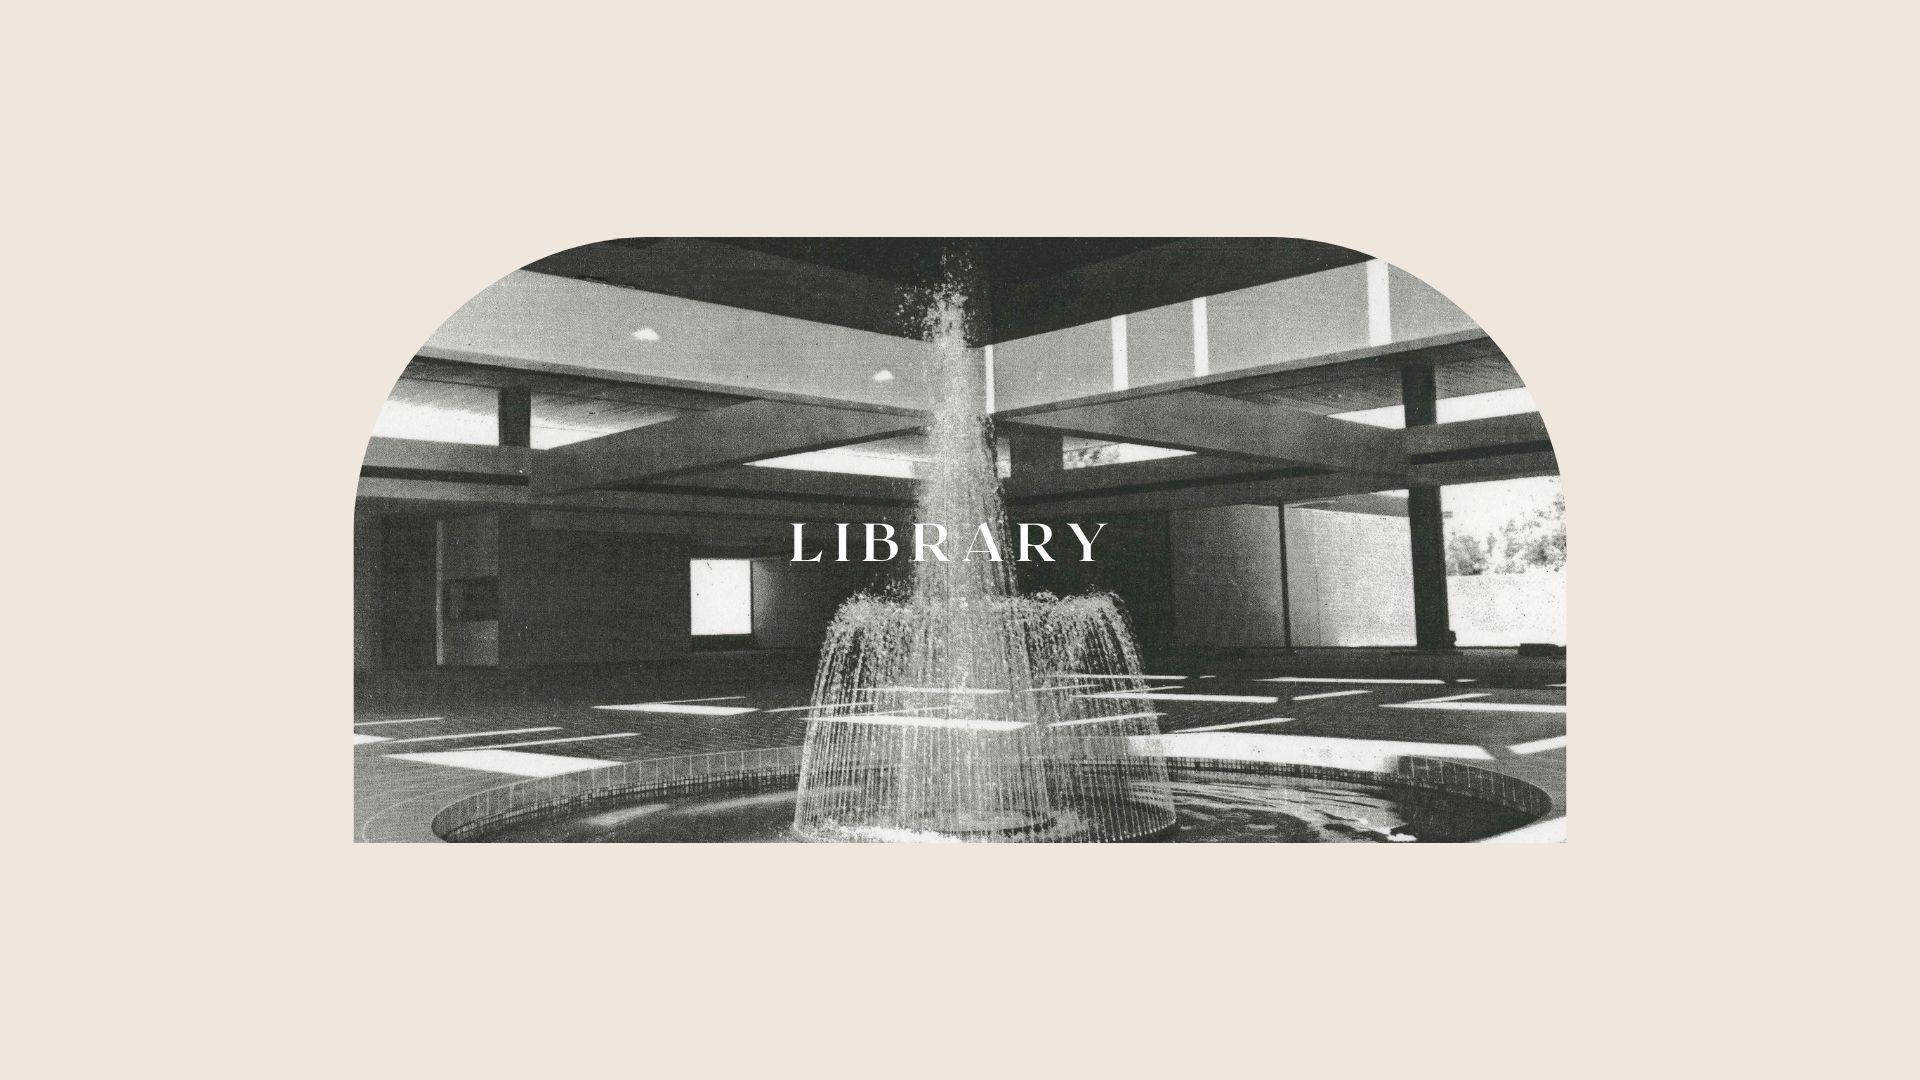 Library.  Image of original palm springs library indoor water feature.